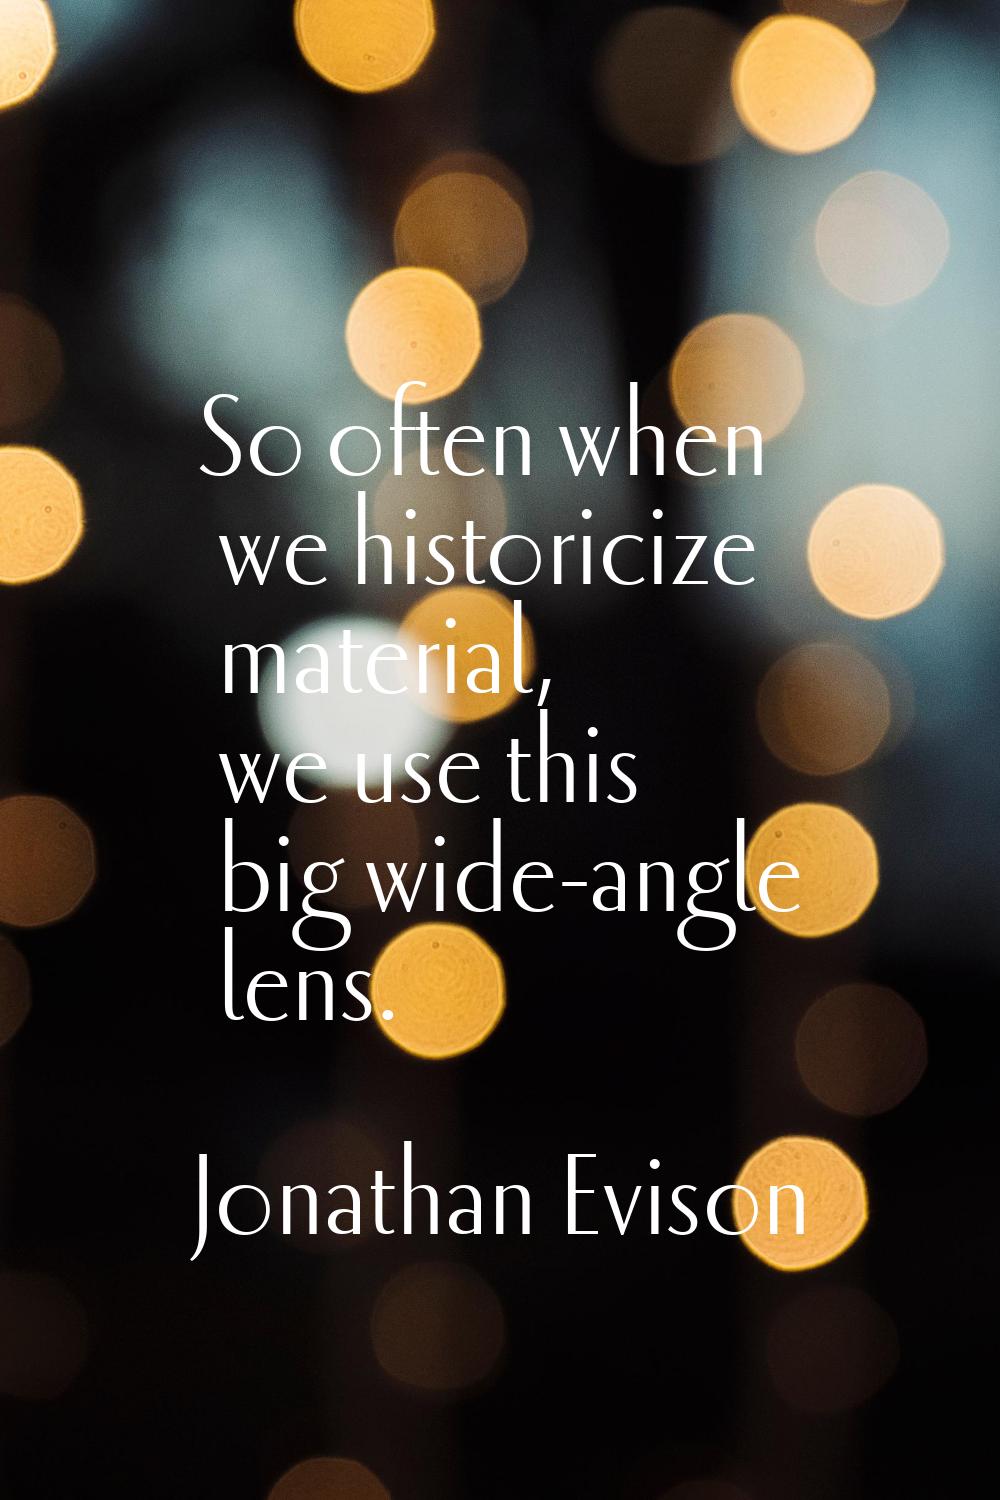 So often when we historicize material, we use this big wide-angle lens.